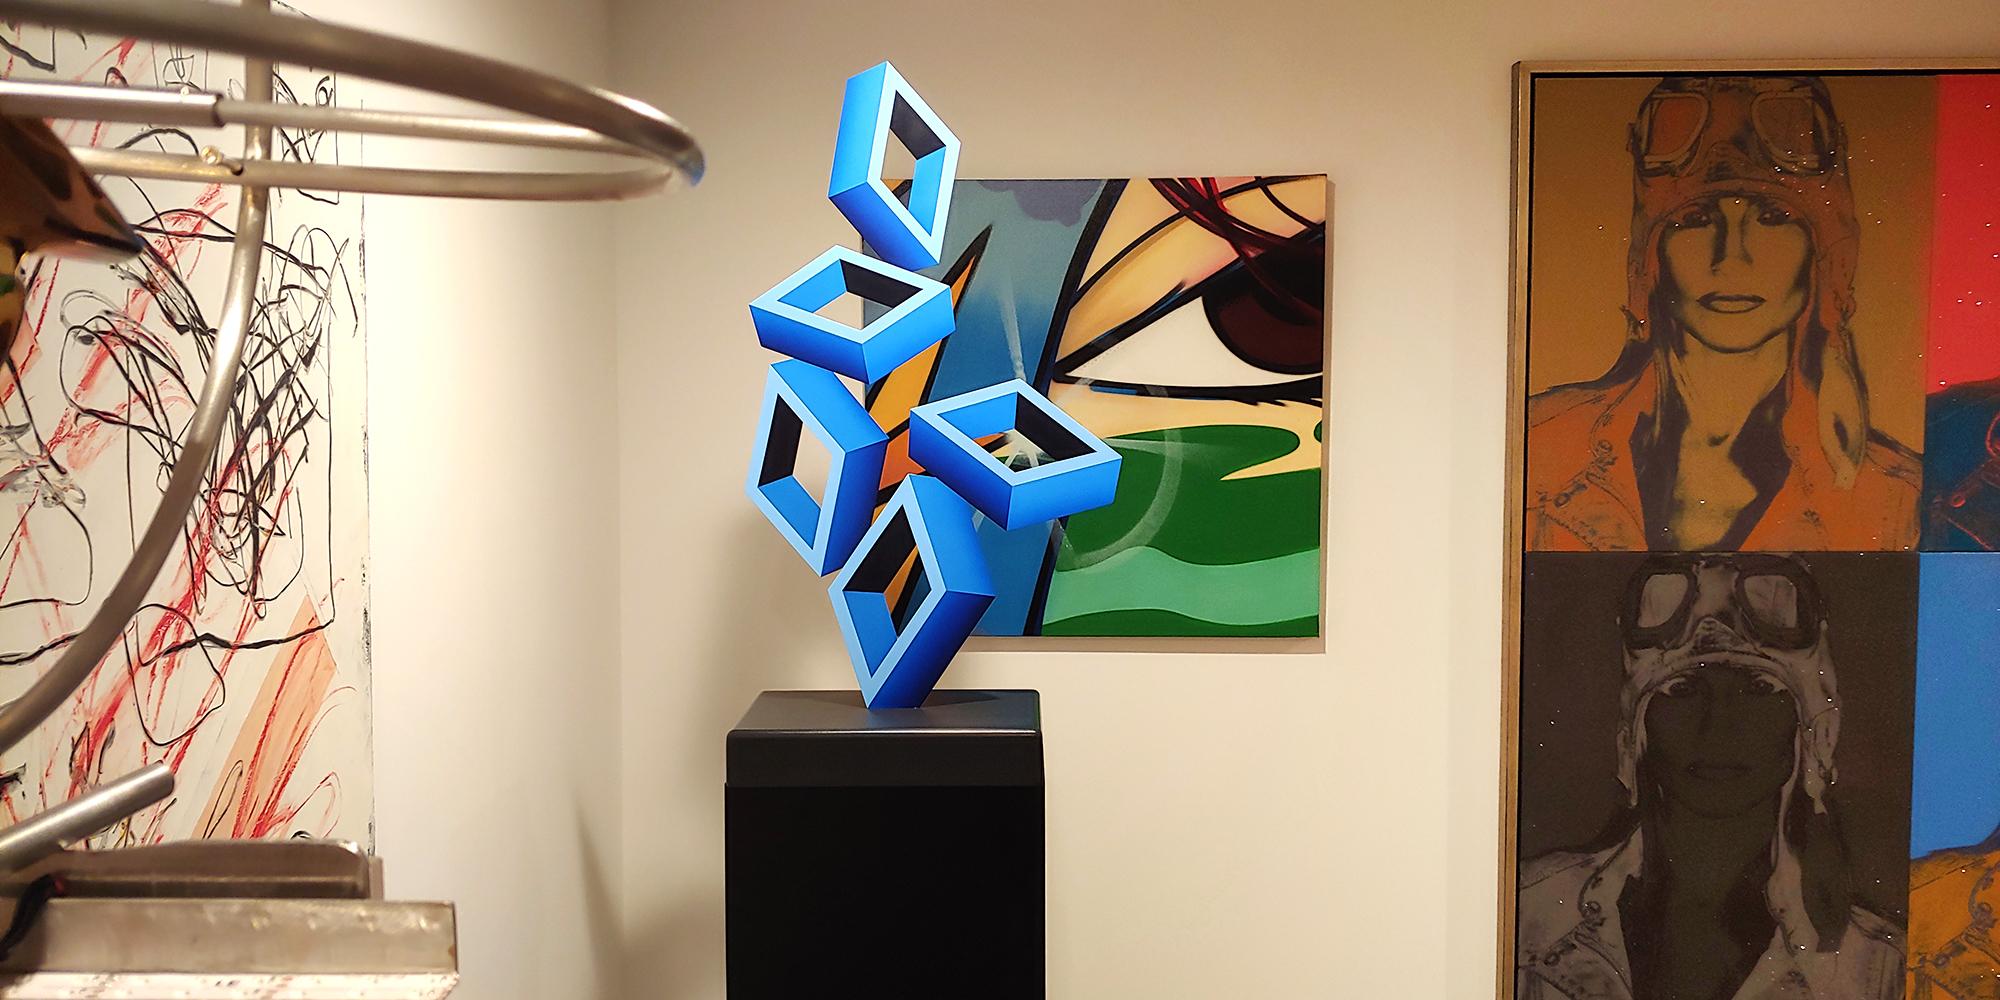 We are pleased to announce that we have just receive at the gallery this new Large aluminum sculpture by Sanseviero titled 